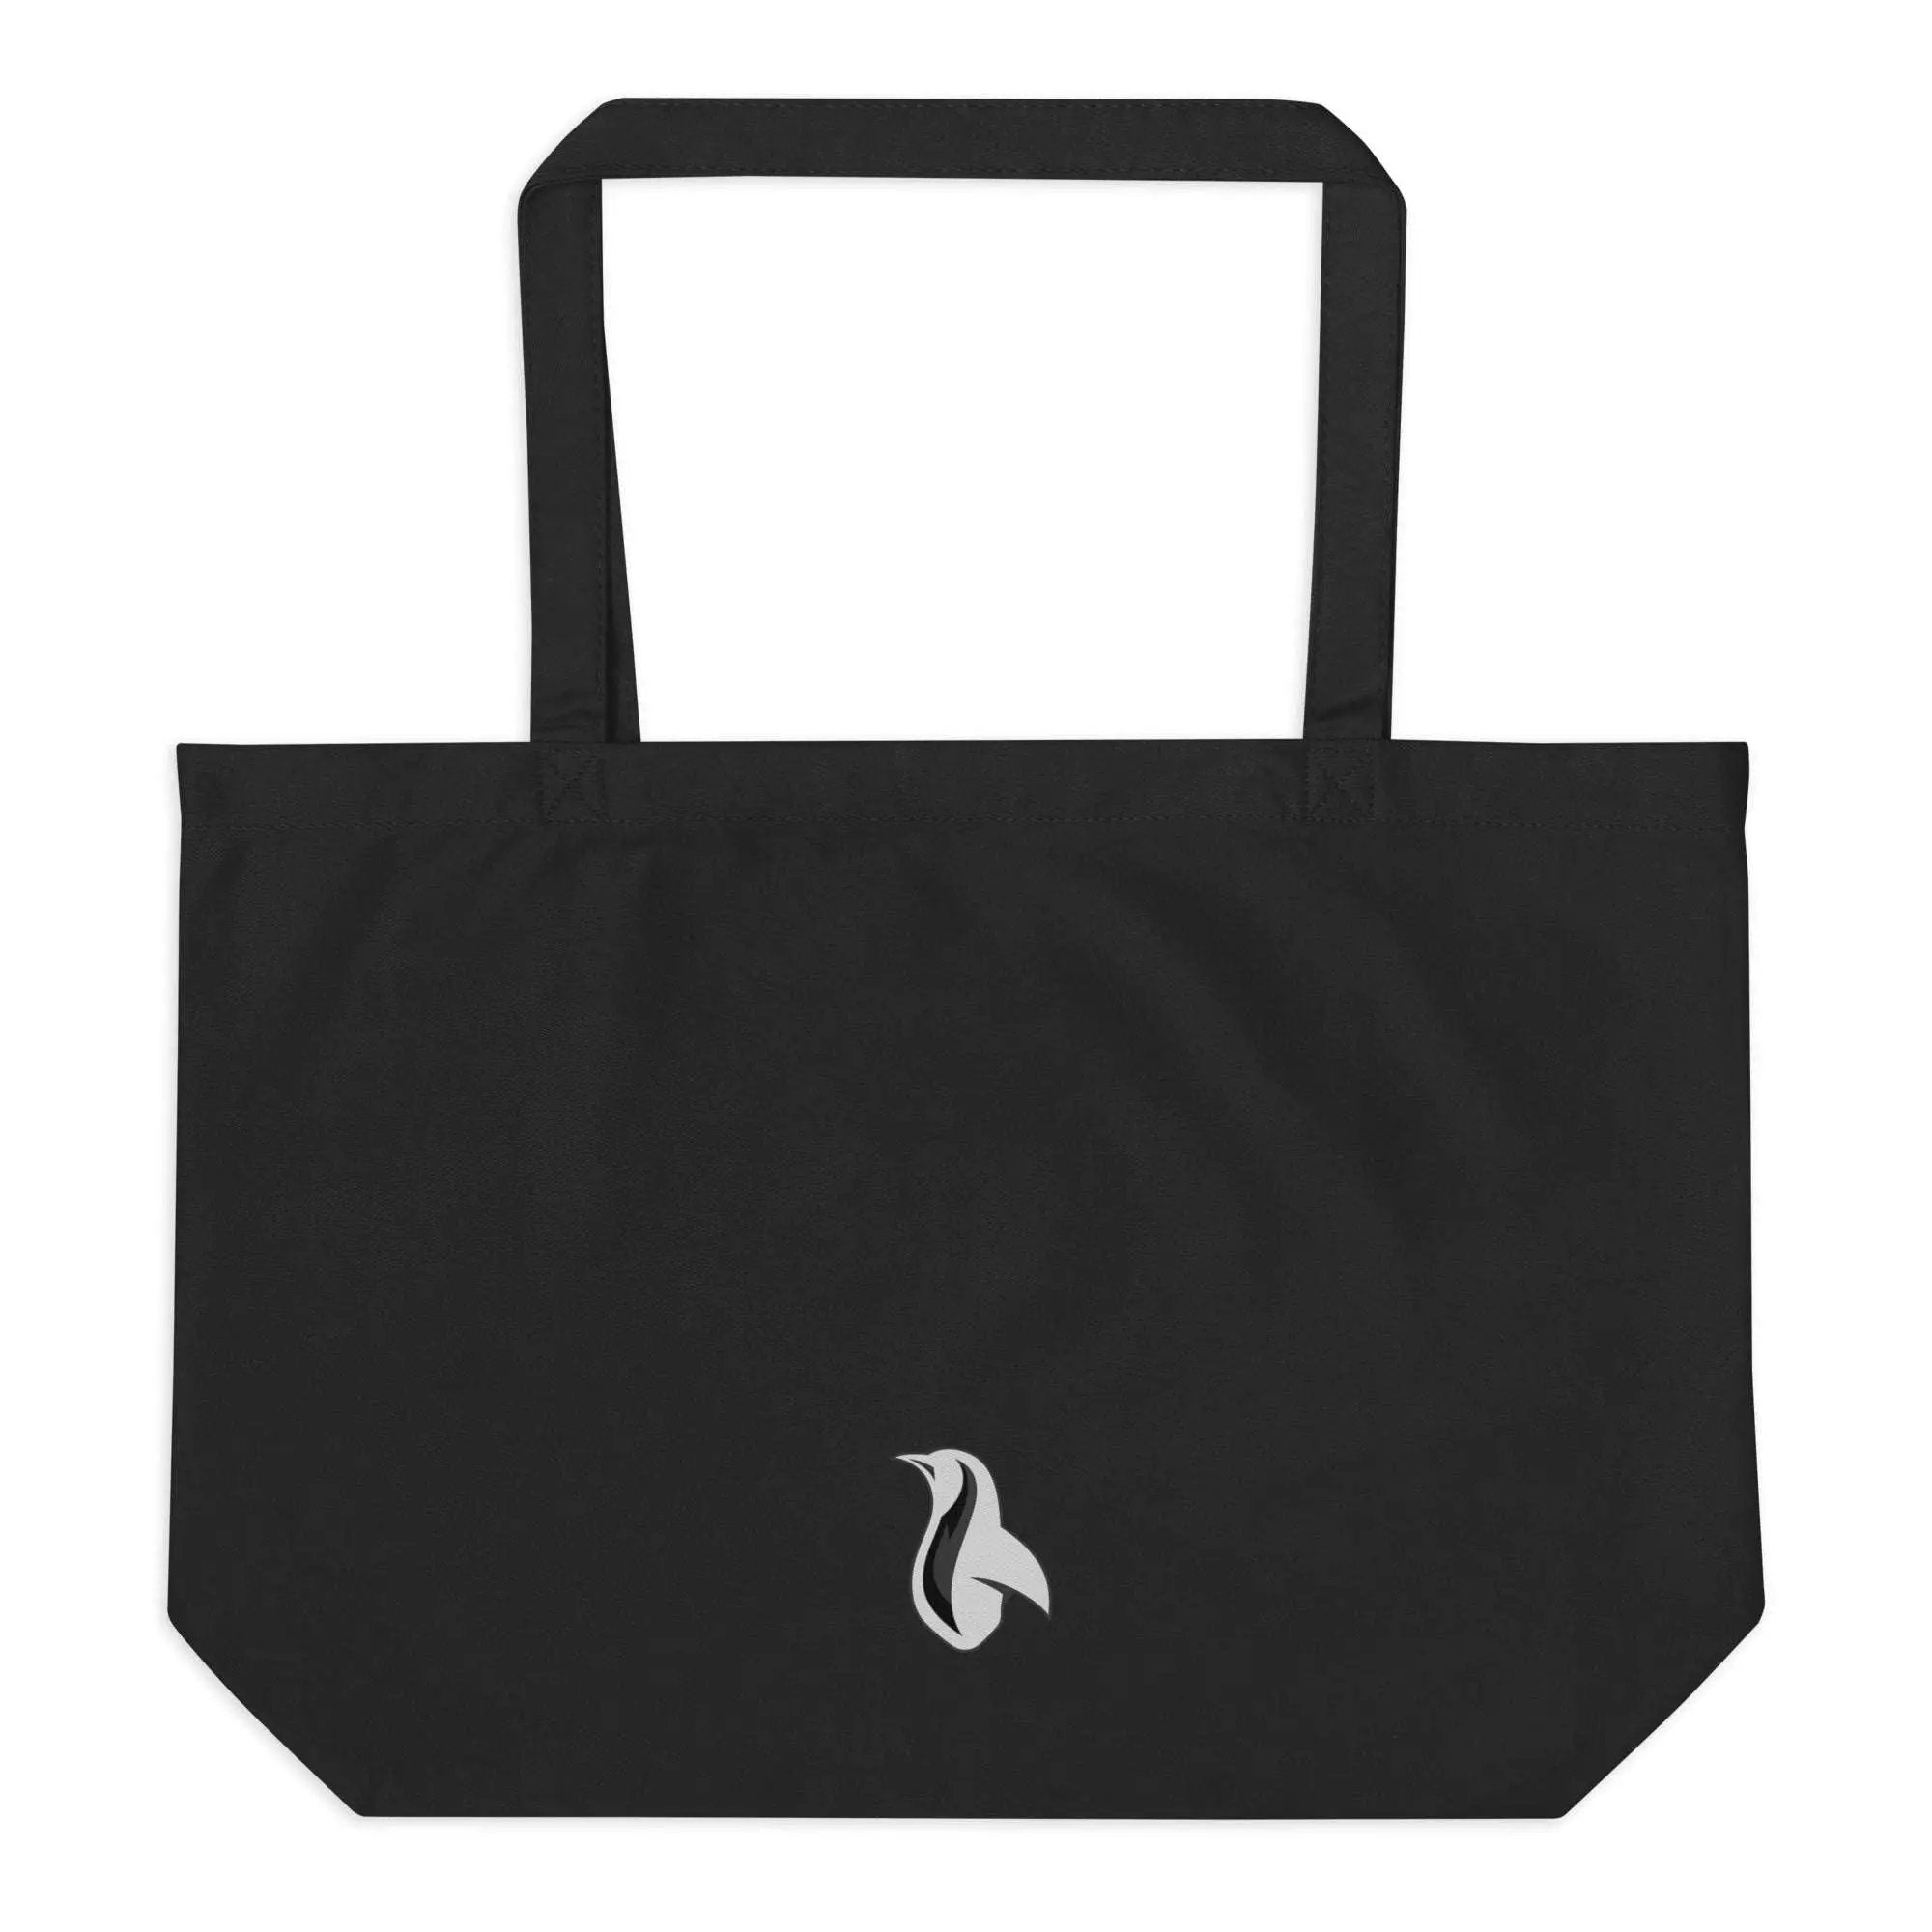 a black bag with a white logo on it